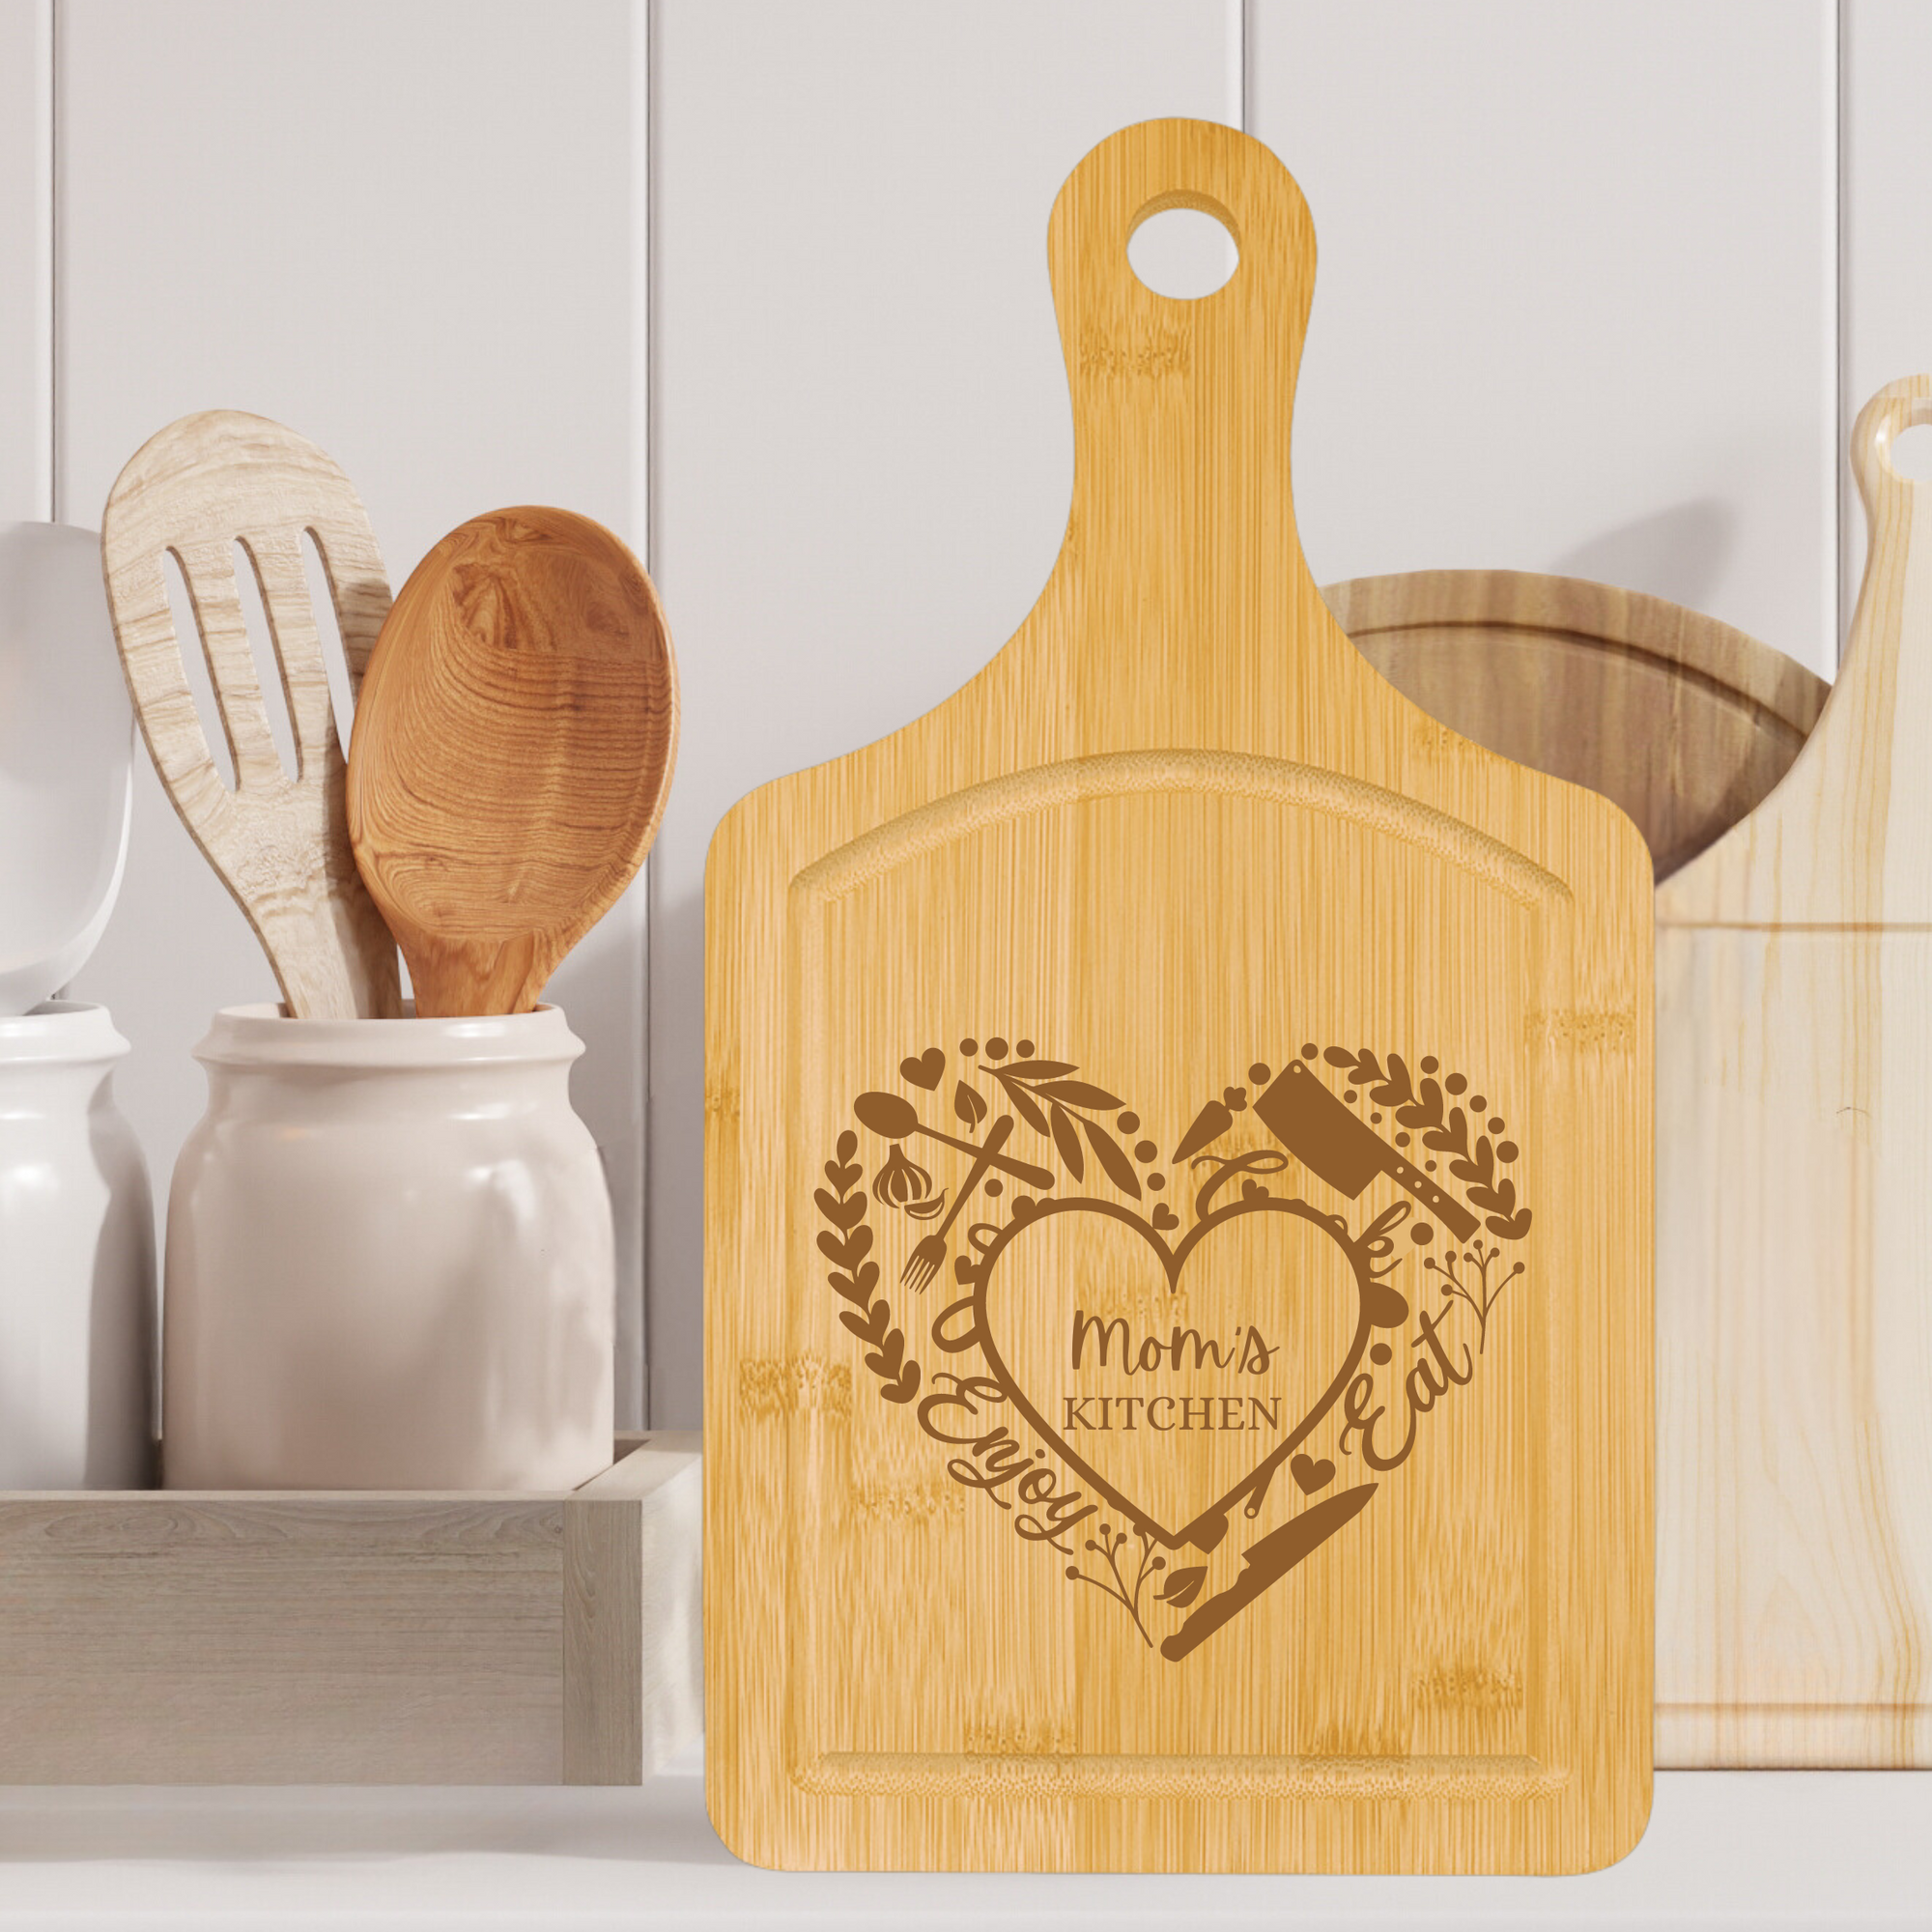 Made With Love Paddle Cutting Board